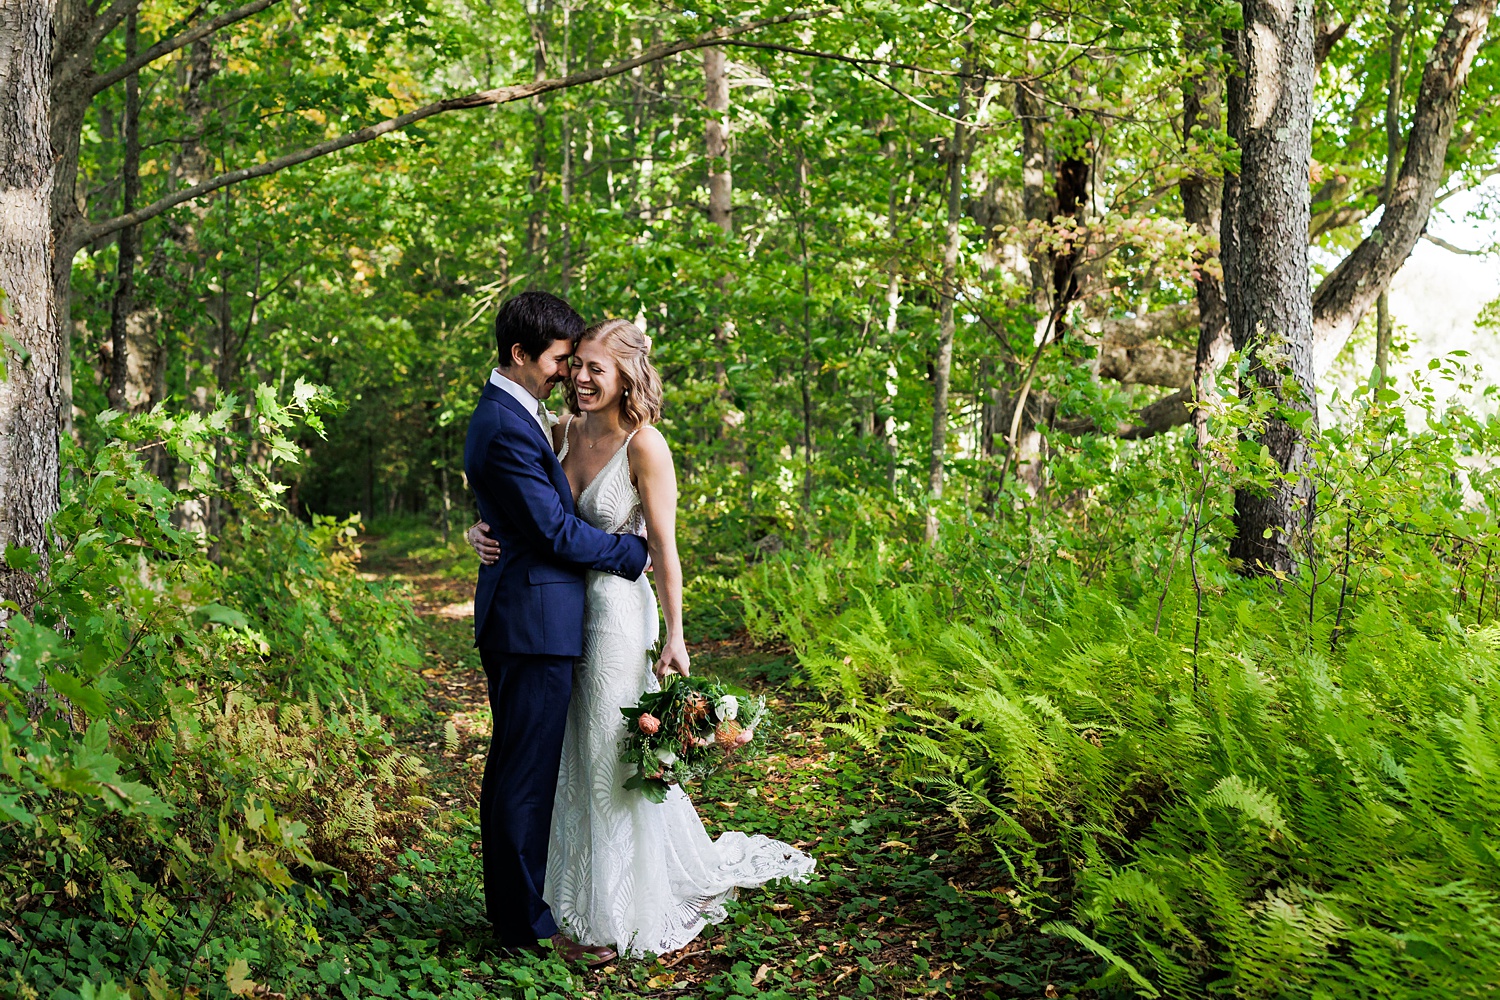 A little laughter from the married couple in the woods on their wedding day